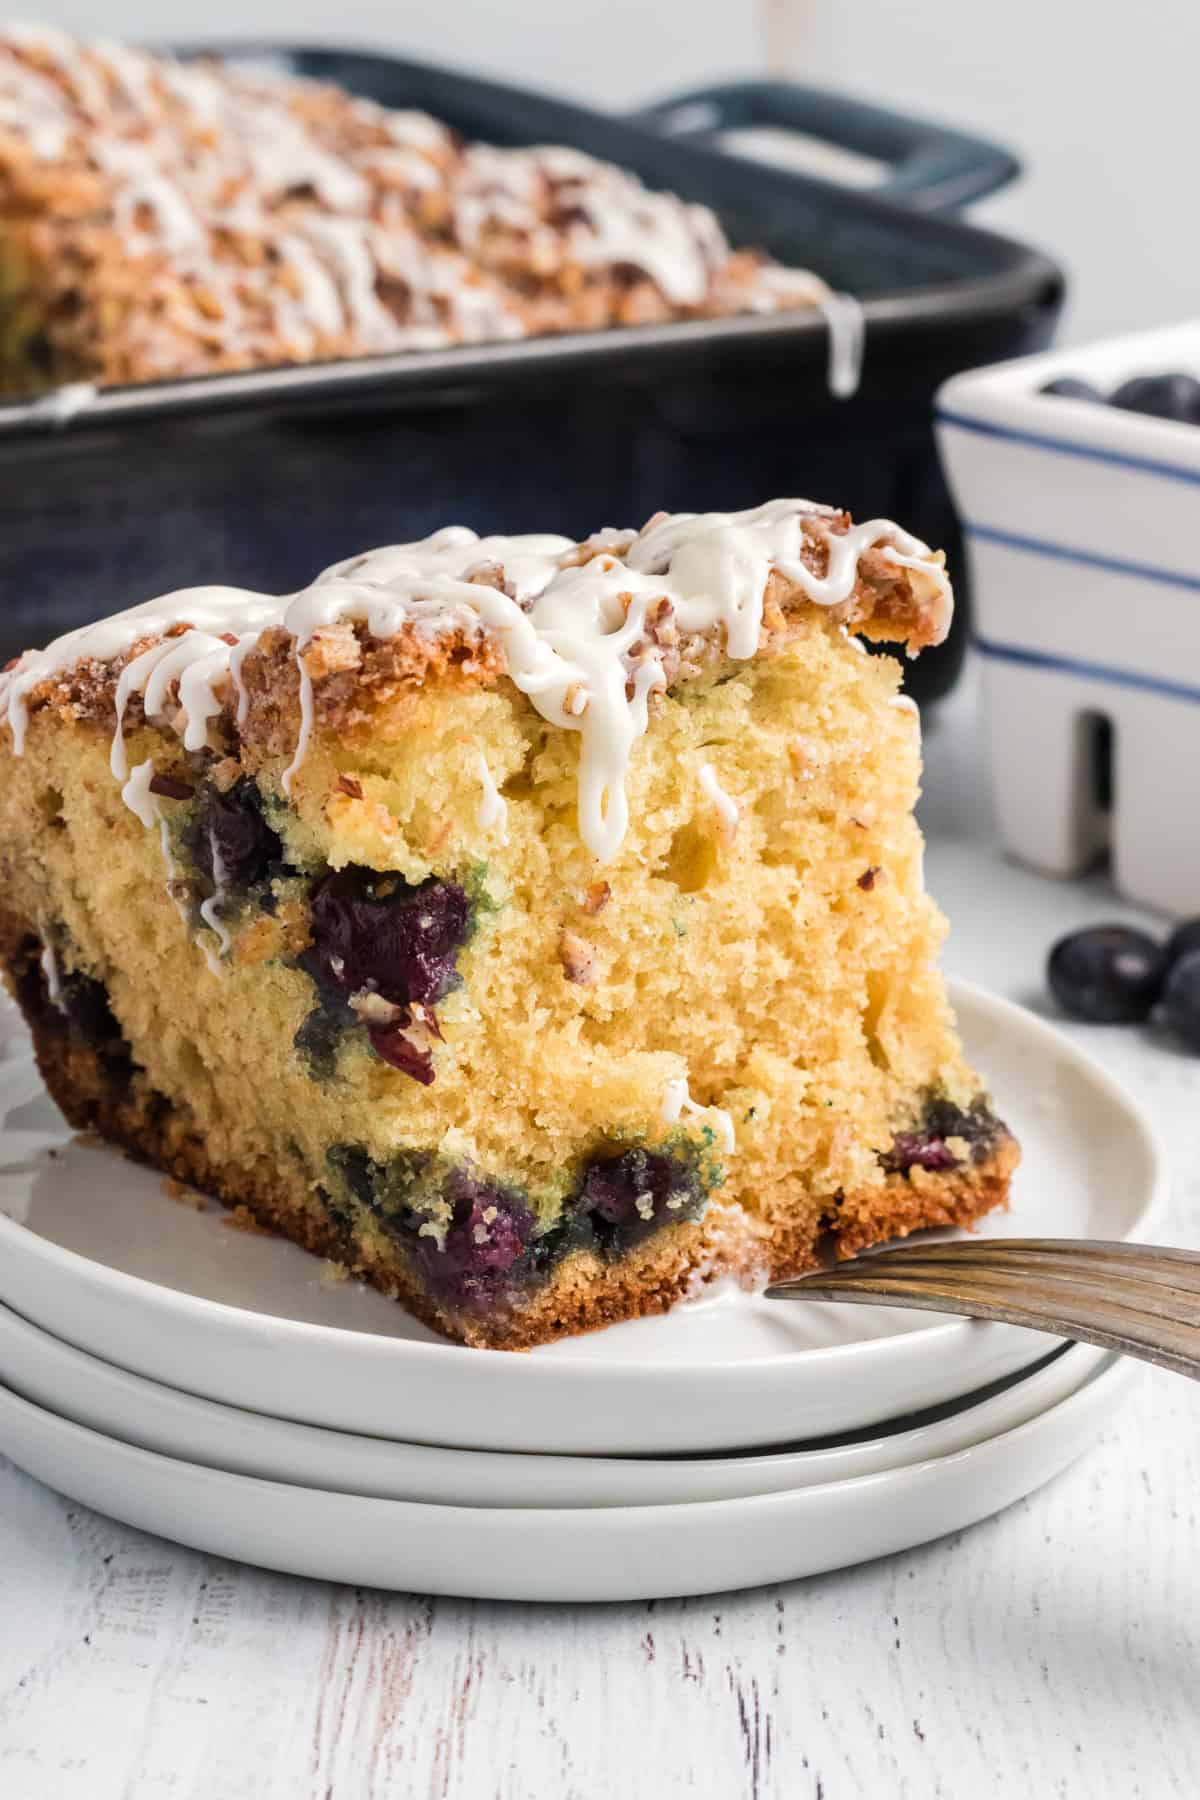 A large slice of blueberry coffee cake is placed on a stack of white plates.